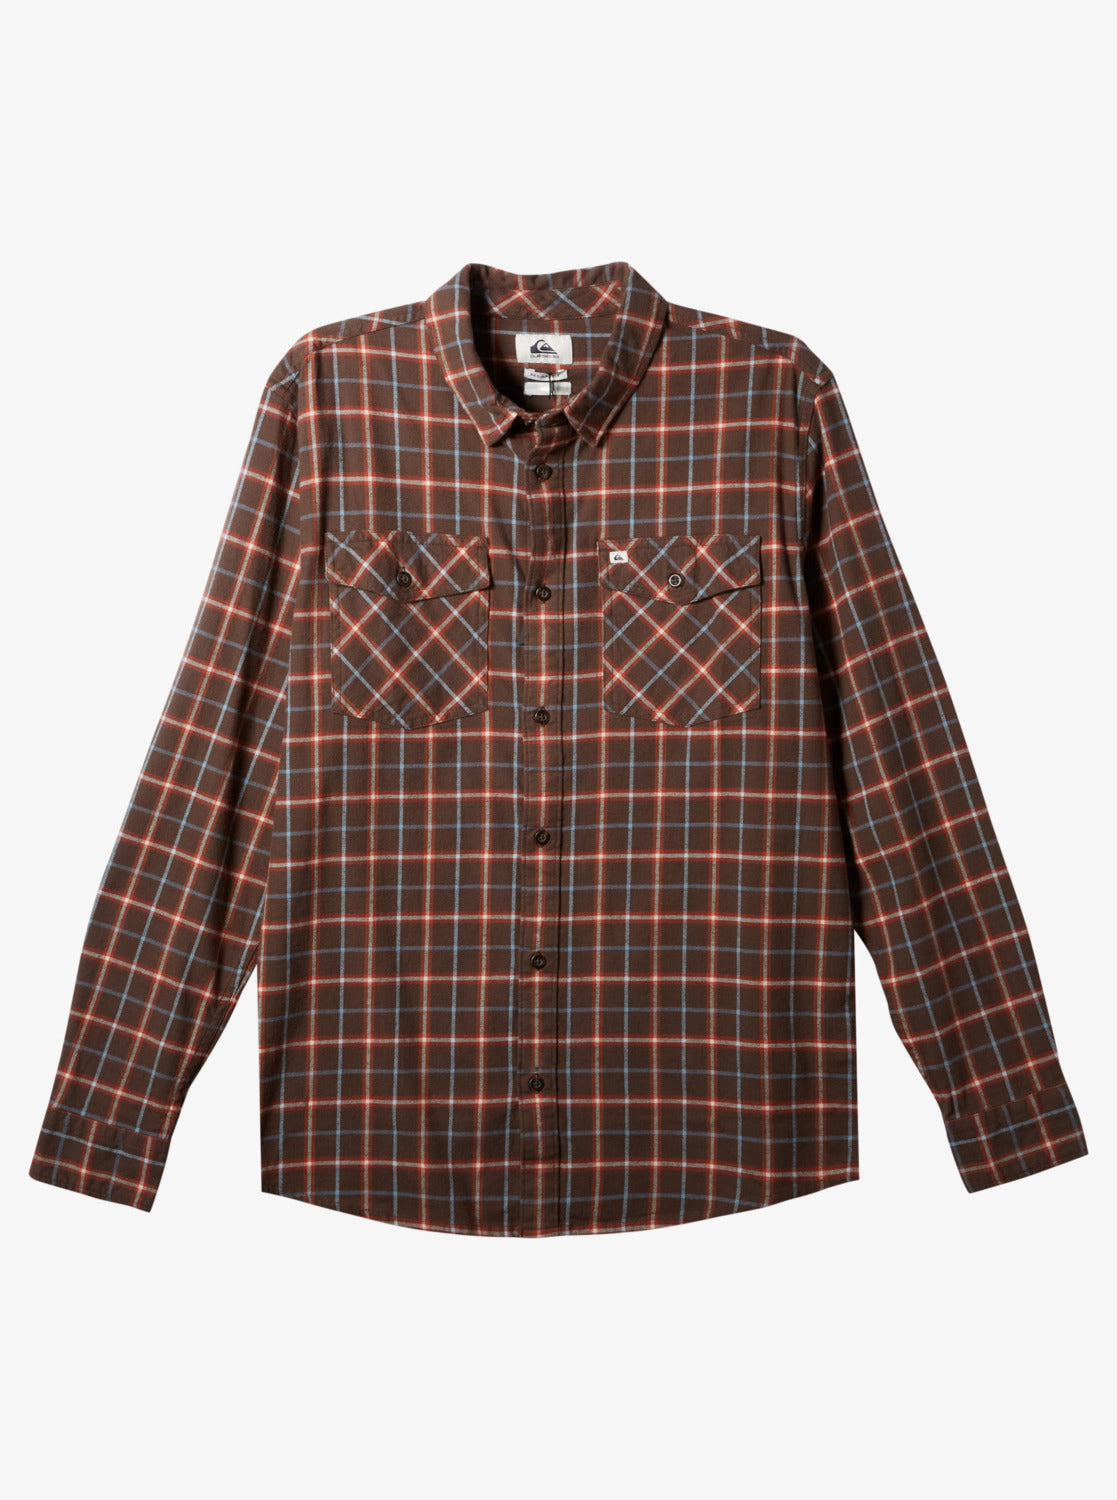 COUNTRY TOUCH SPORTSWEAR Shirt Mens L Brown Plaid Wool Blend Quilted Lining  £16.99 - PicClick UK